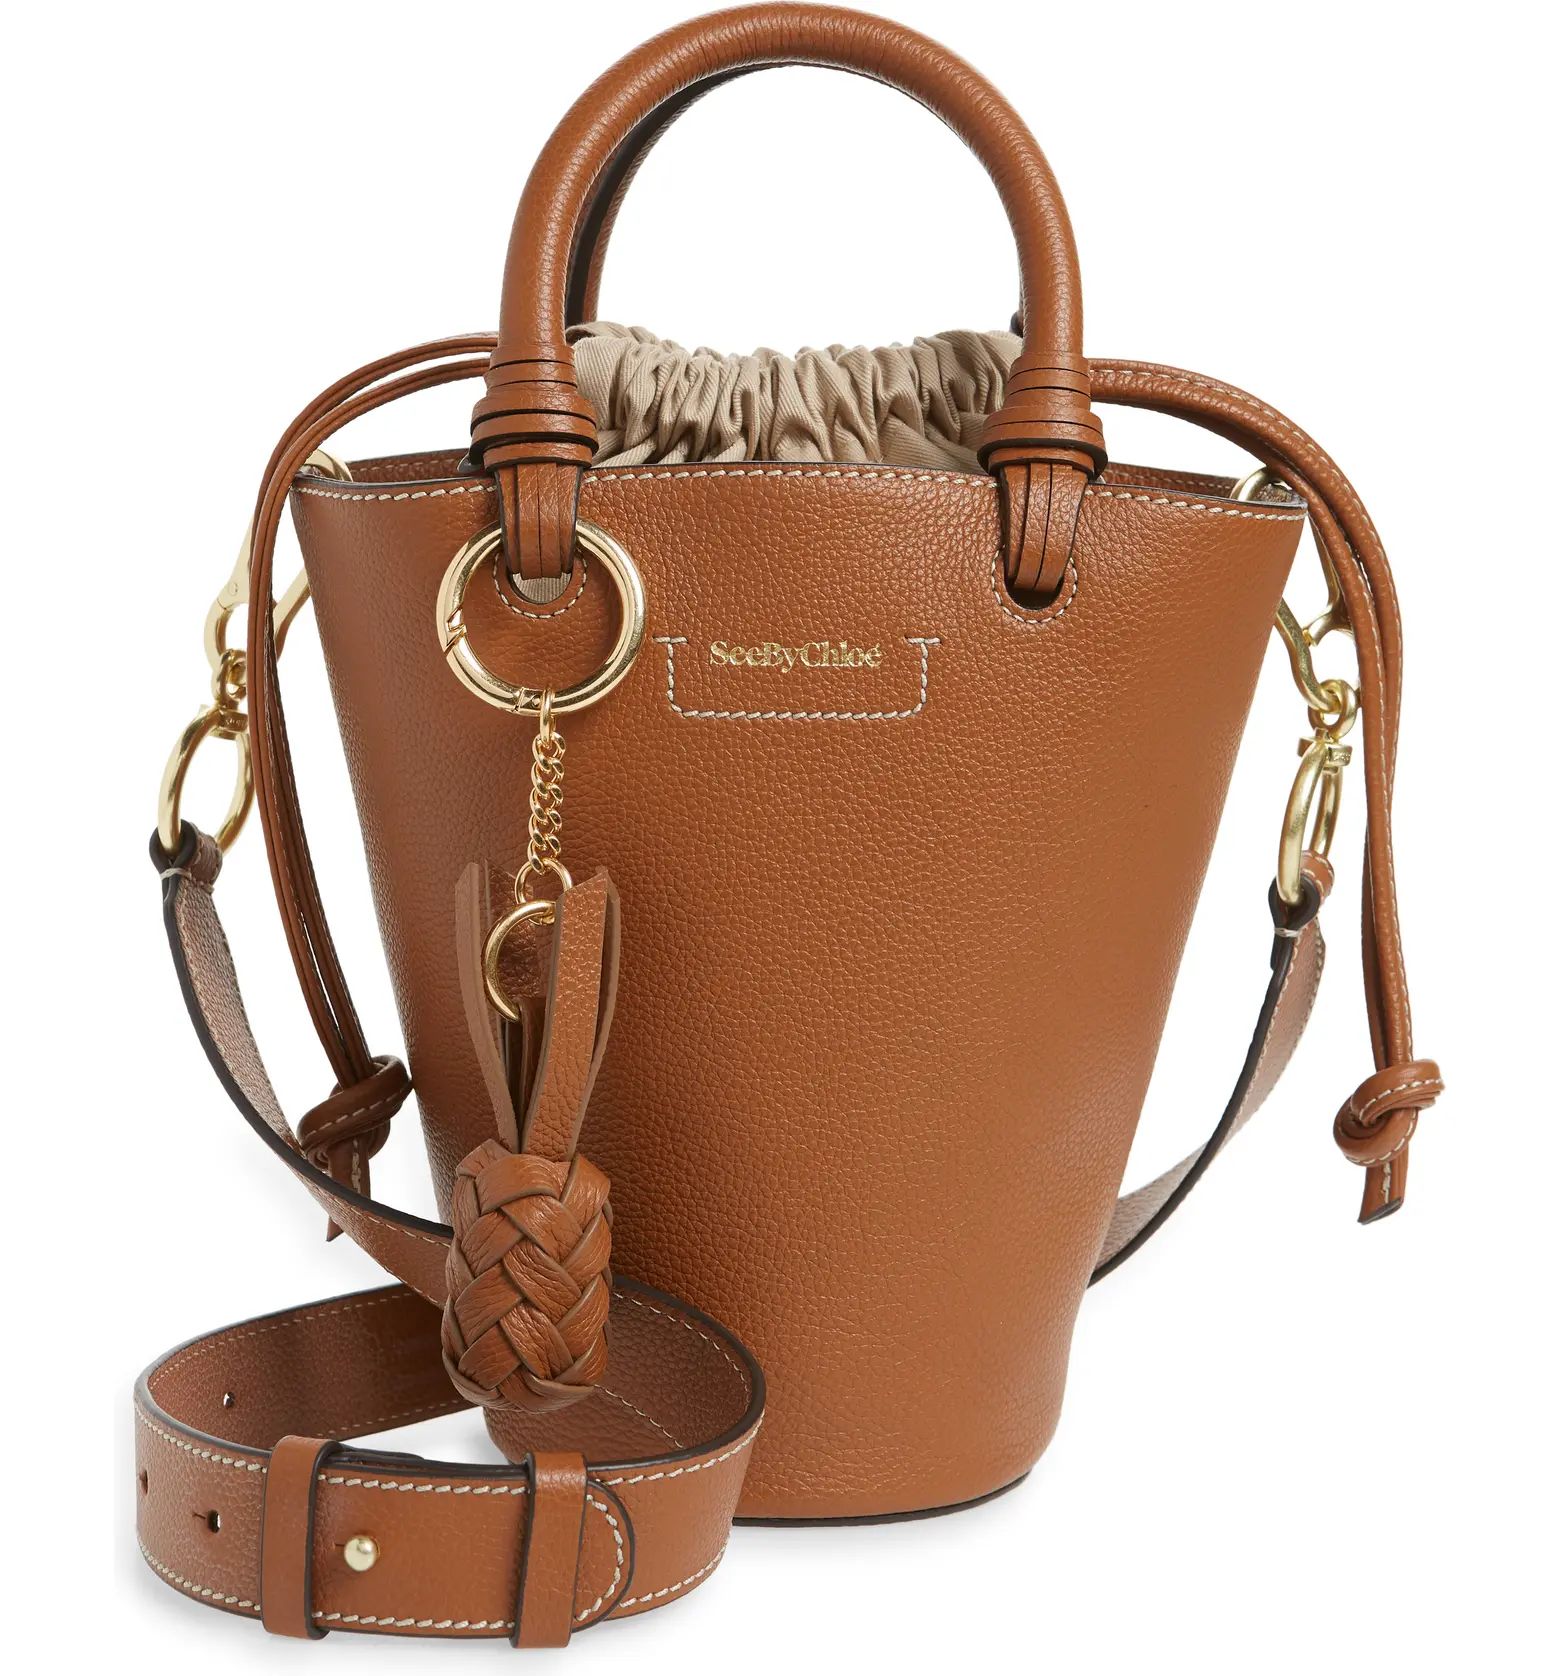 Cecilia Small Leather Bucket Bag | Nordstrom Rack